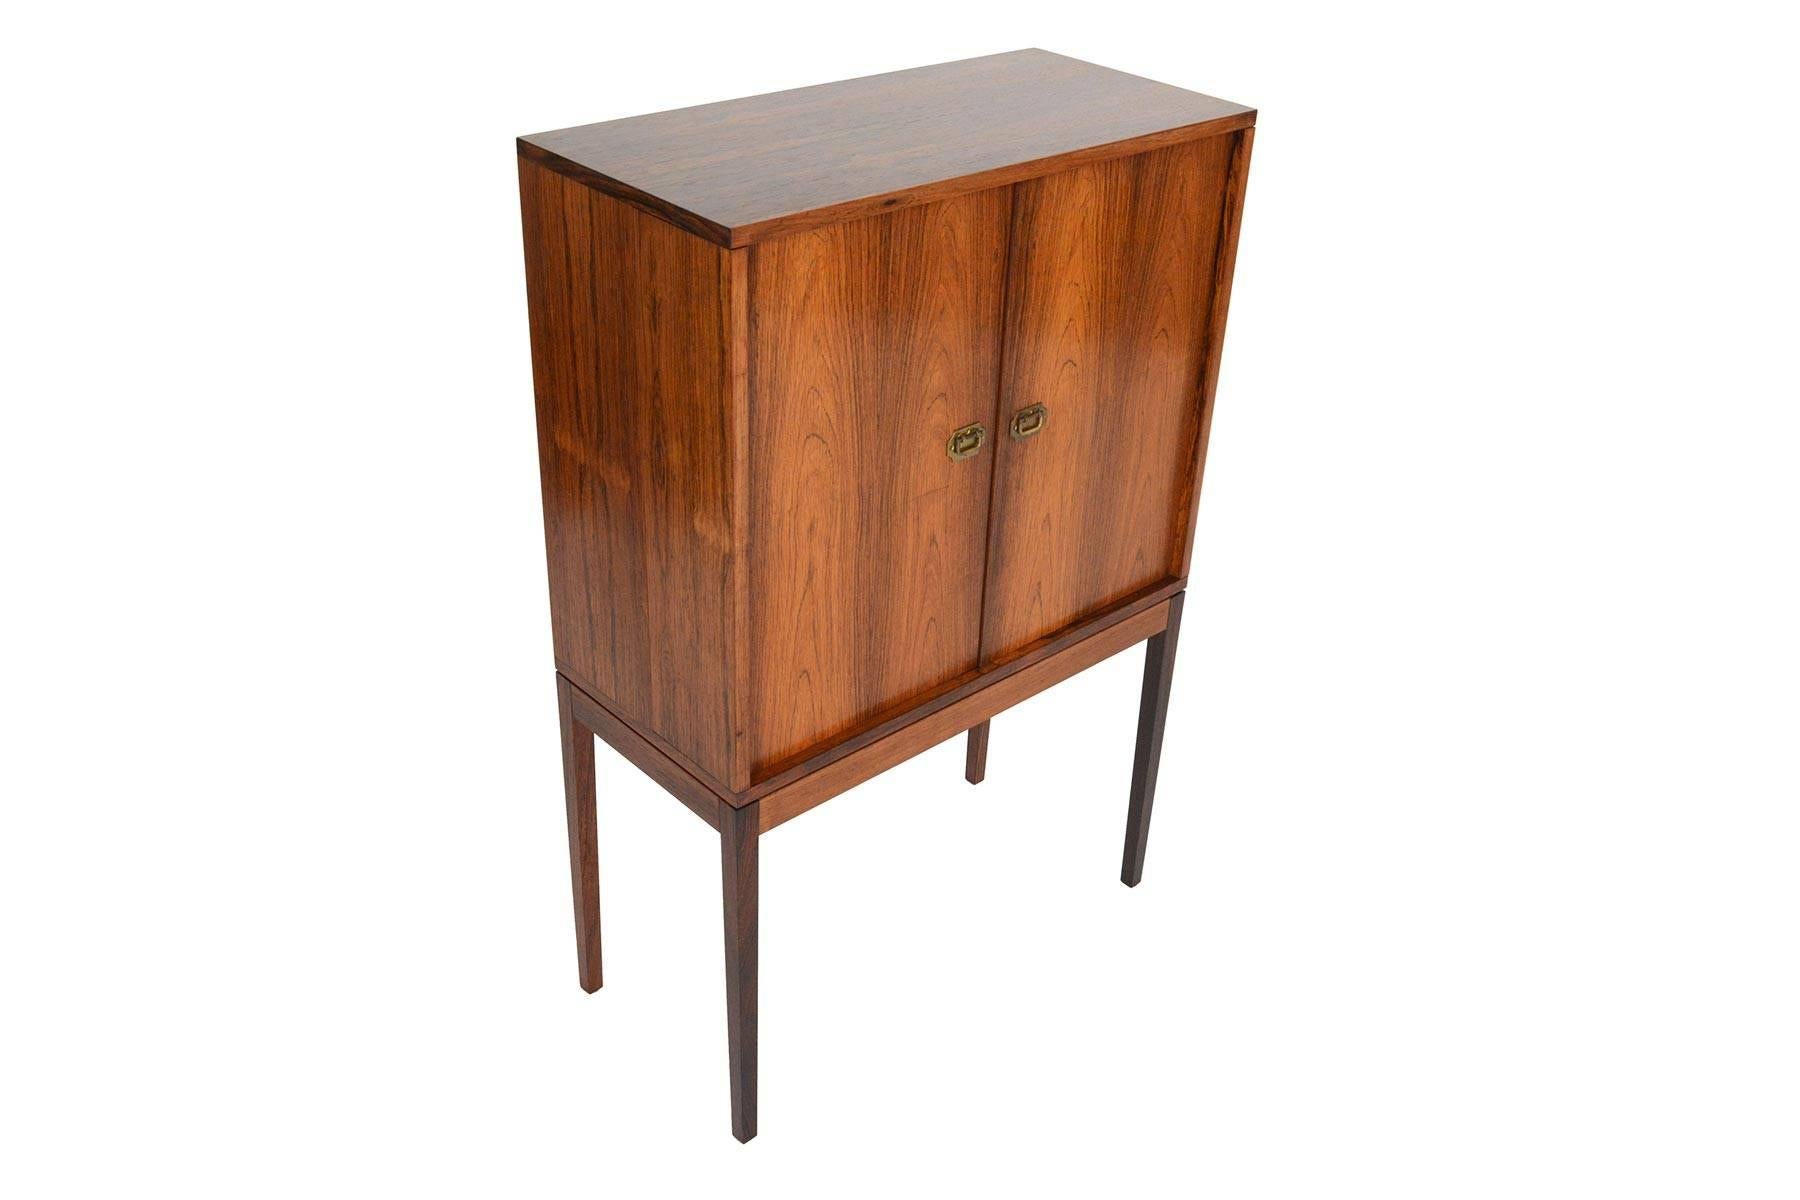 This beautiful small Danish modern bar was designed by Henning Korch in 1968 for Silkeborg Møbelfabrik as model 132. Two doors with the designer's signature brass pulls open to reveal an adjustable glass shelf. Both doors feature three deep shelves